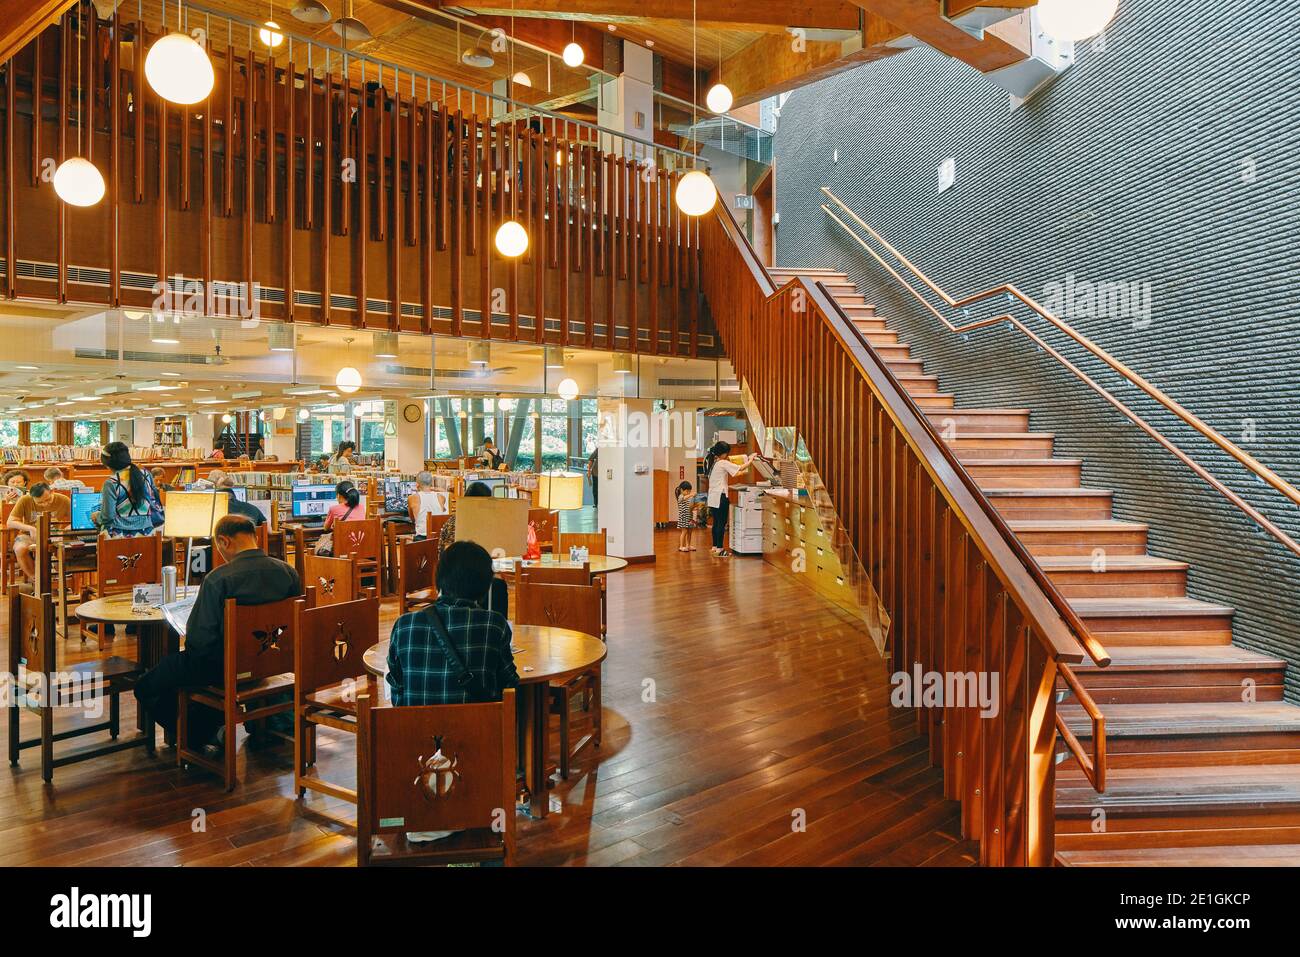 Interior of the public library in Beitou, Taipei, Taiwan's first green library, one of the most energy efficient and environmentally friendly buildings of East Asia. Stock Photo